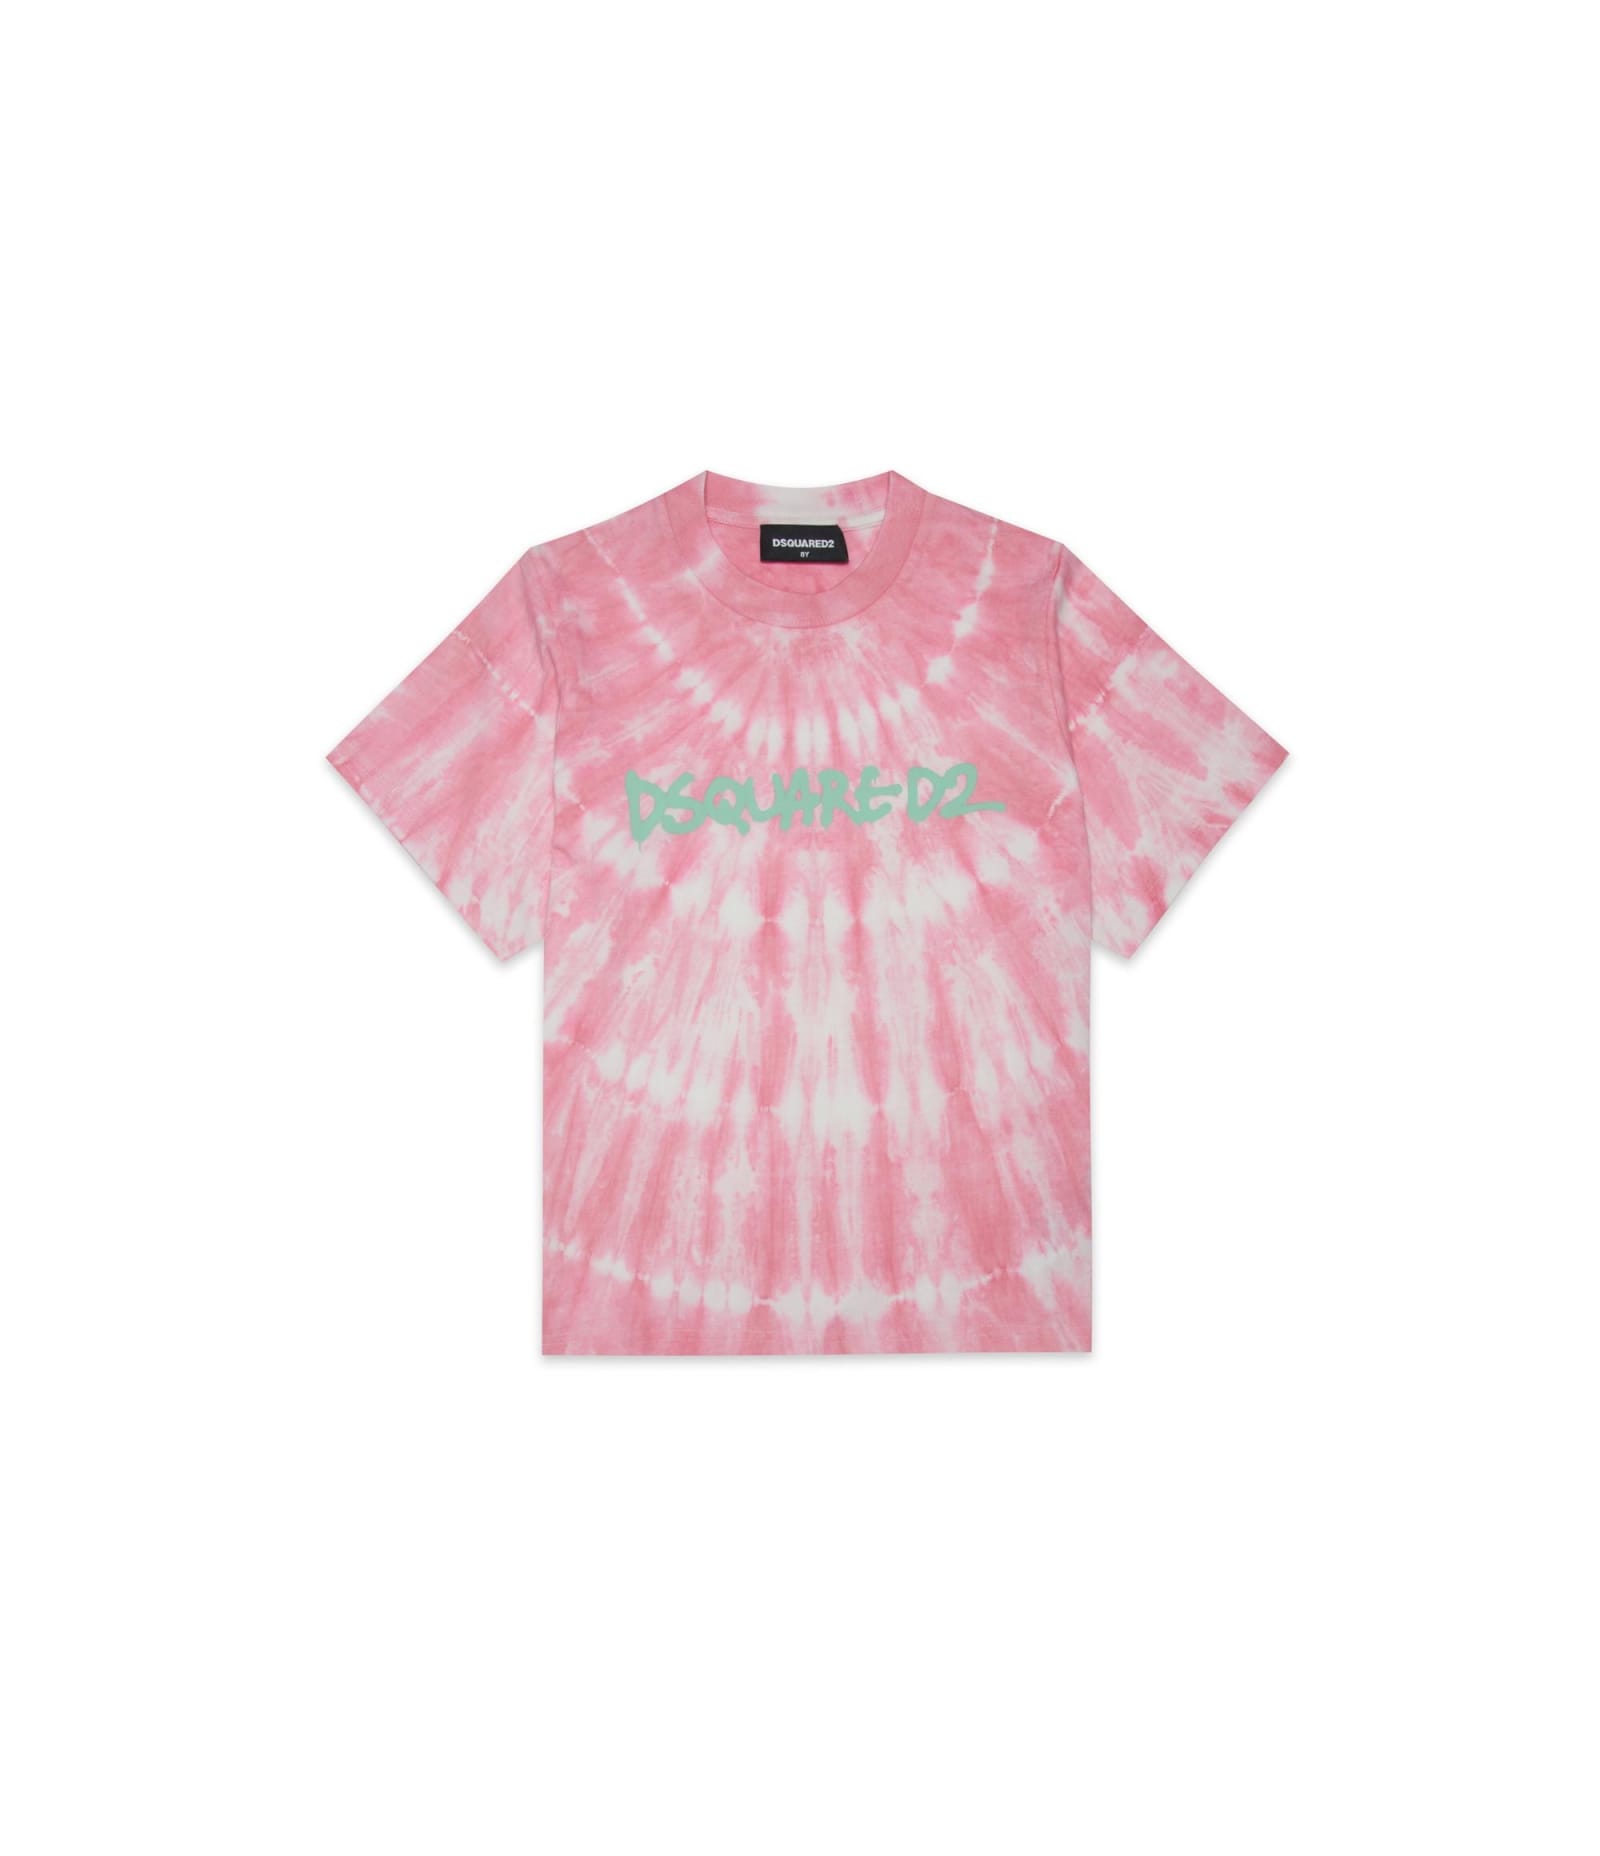 DSQUARED2 T-SHIRT WITH TIE-DYE PATTERN